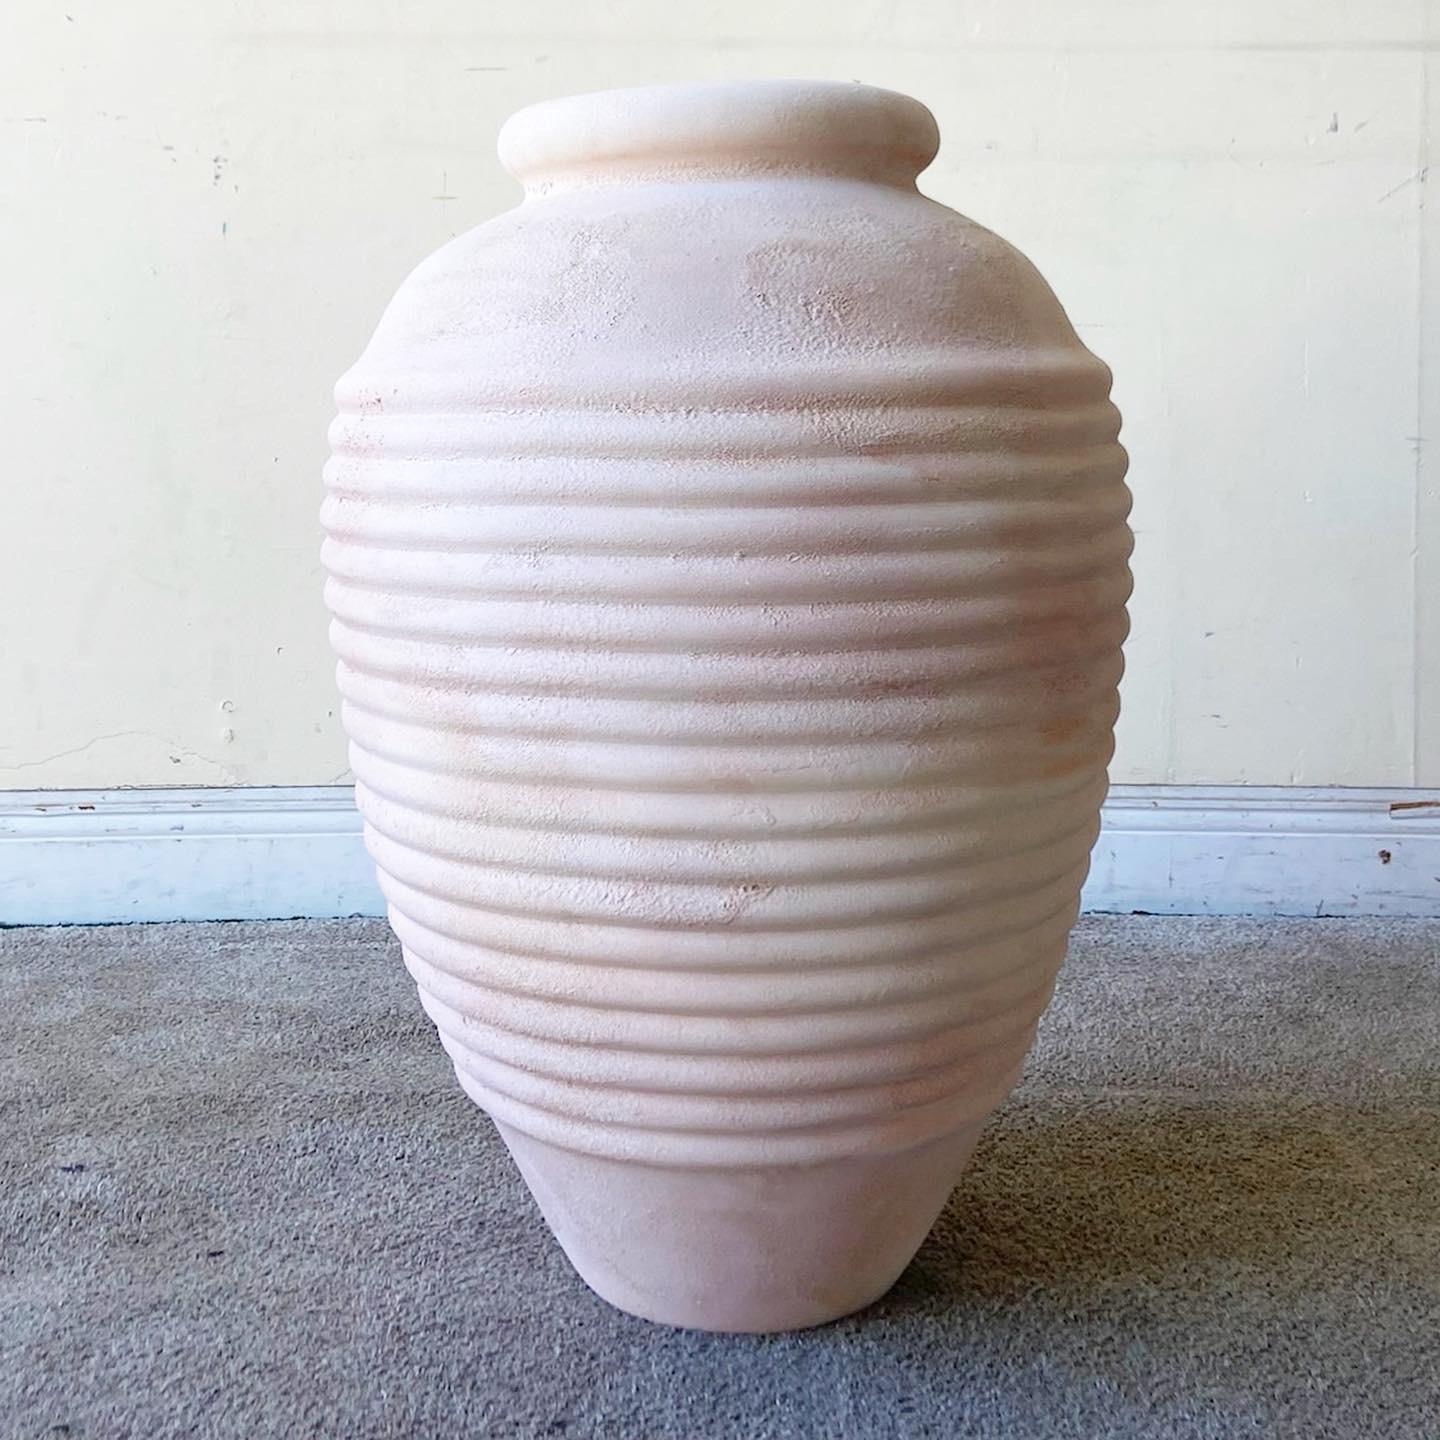 Exceptional postmodern ceramic floor vase. Features a sculpted body with a pink coat.
  